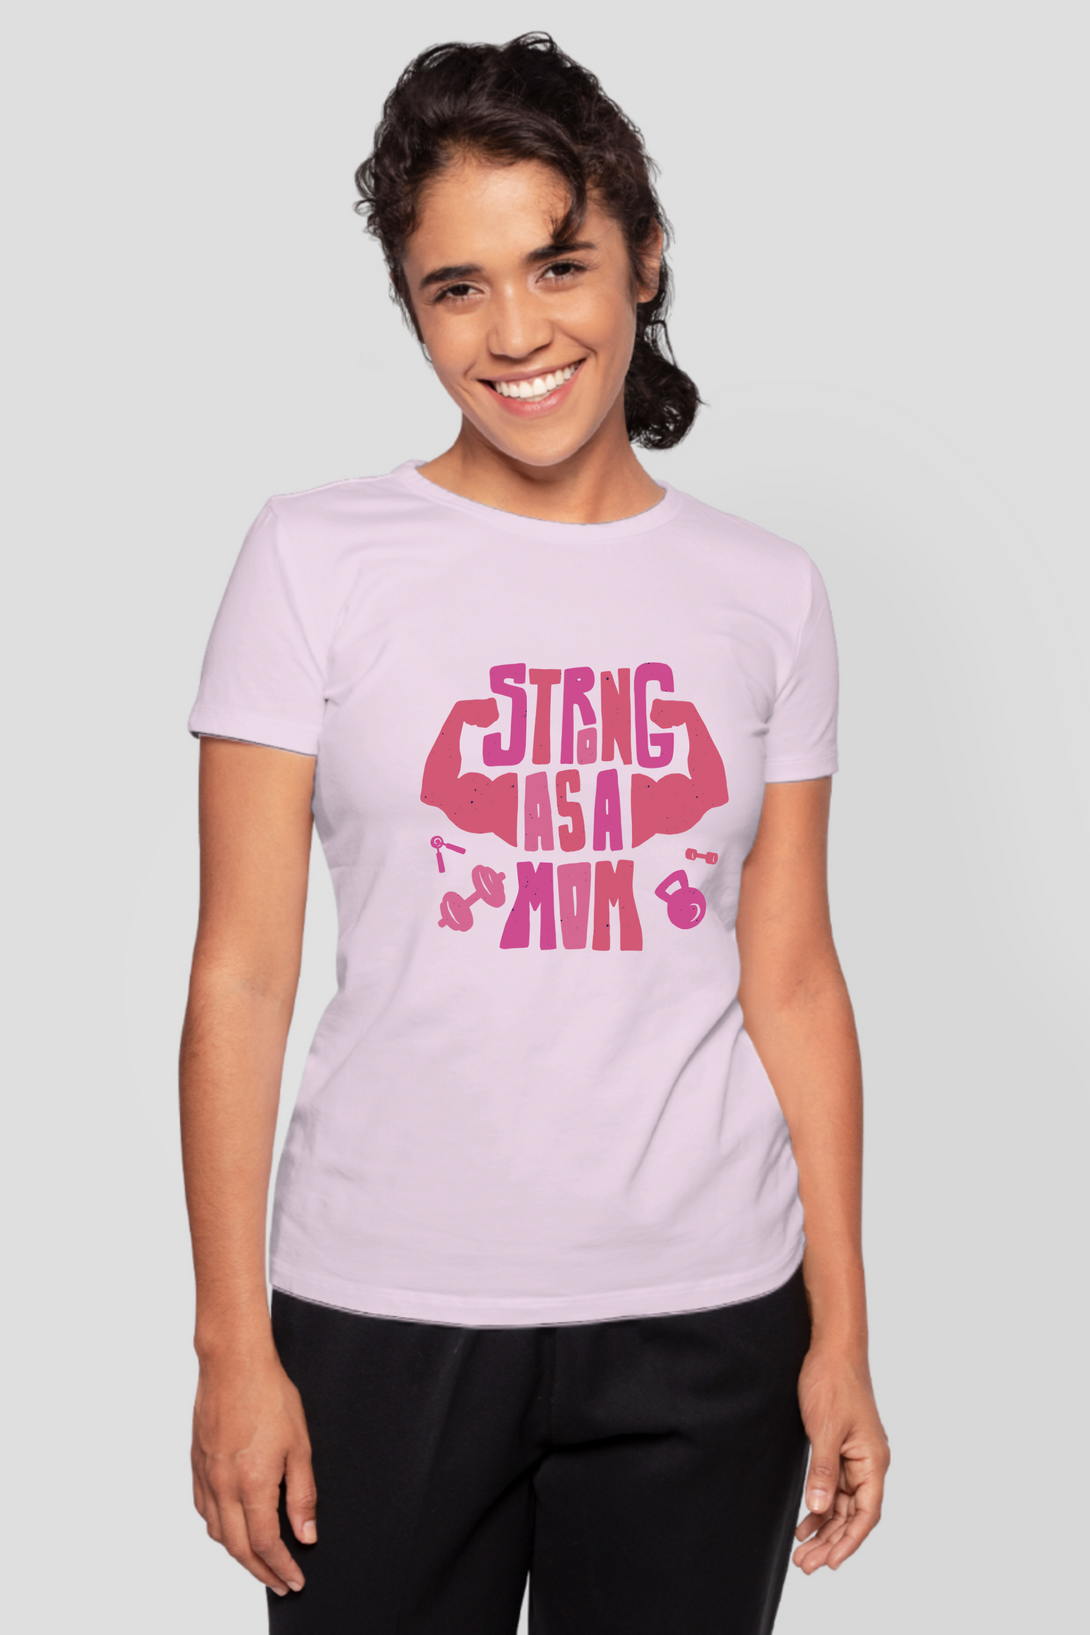 Strong As A Mom Printed T-Shirt For Women - WowWaves - 8